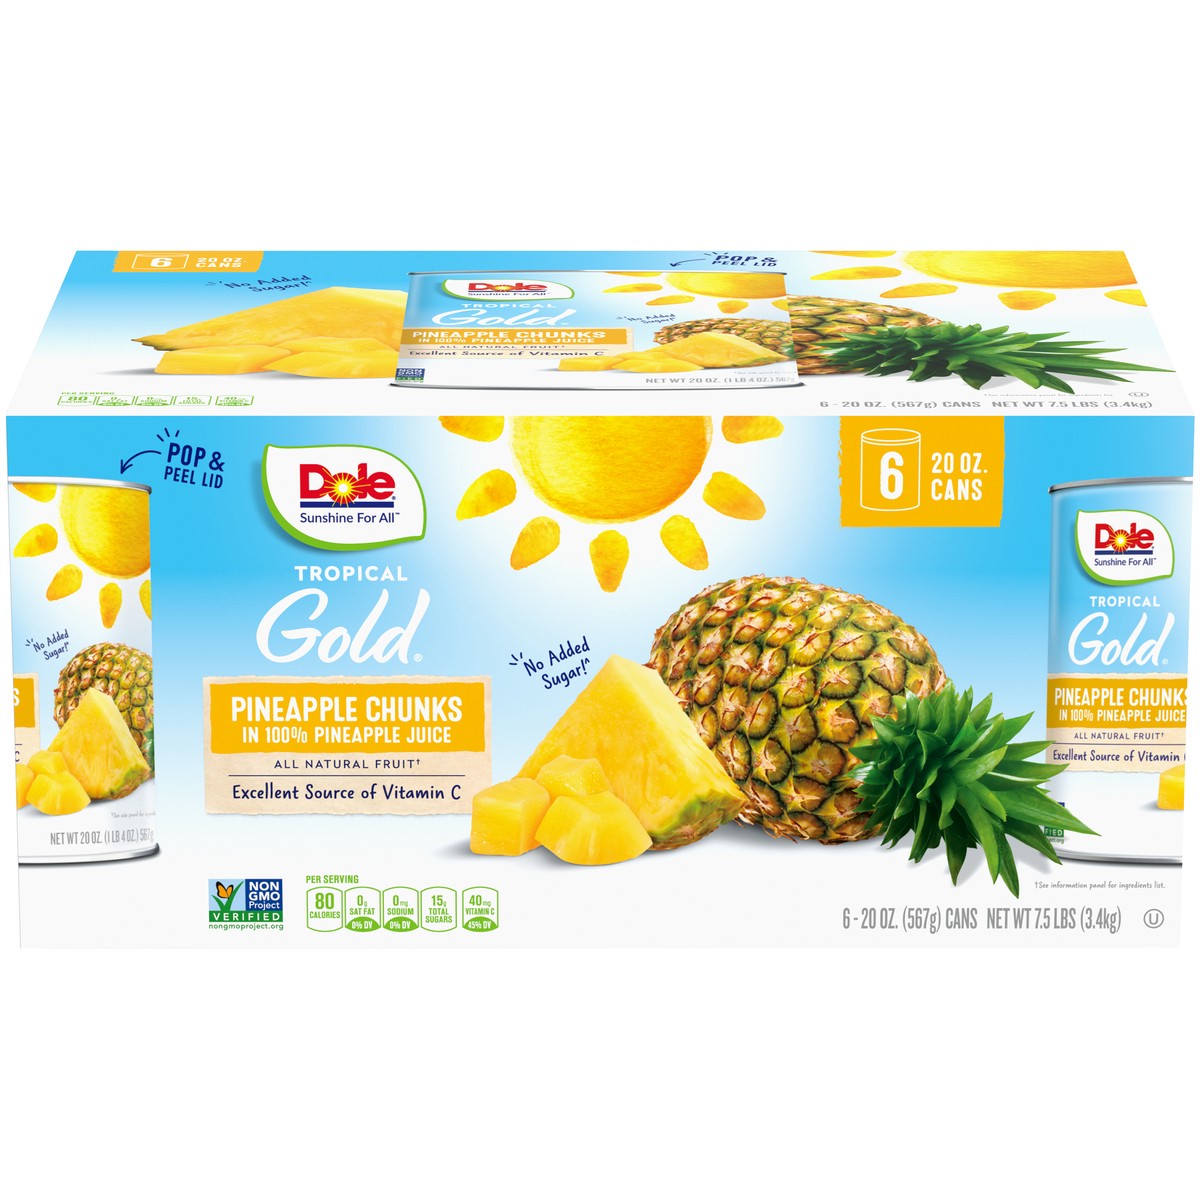 slide 1 of 9, Dole Tropical Gold Pineapple Chunks in 100% Pineapple Juice 6-20 oz. Cans, 7.5 lb